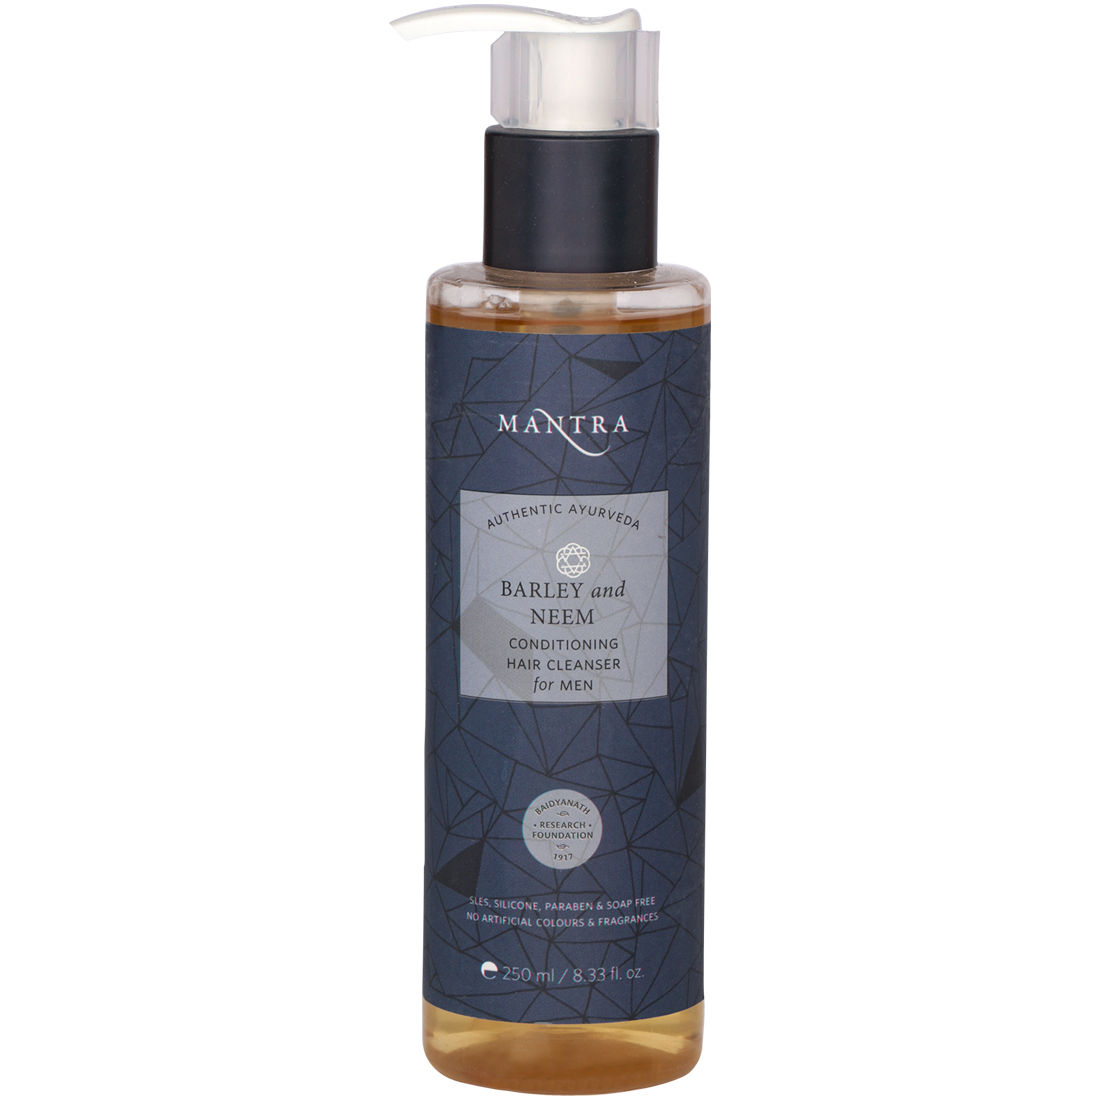 Mantra Herbal Barley And Neem Conditioning Hair Cleanser For Men